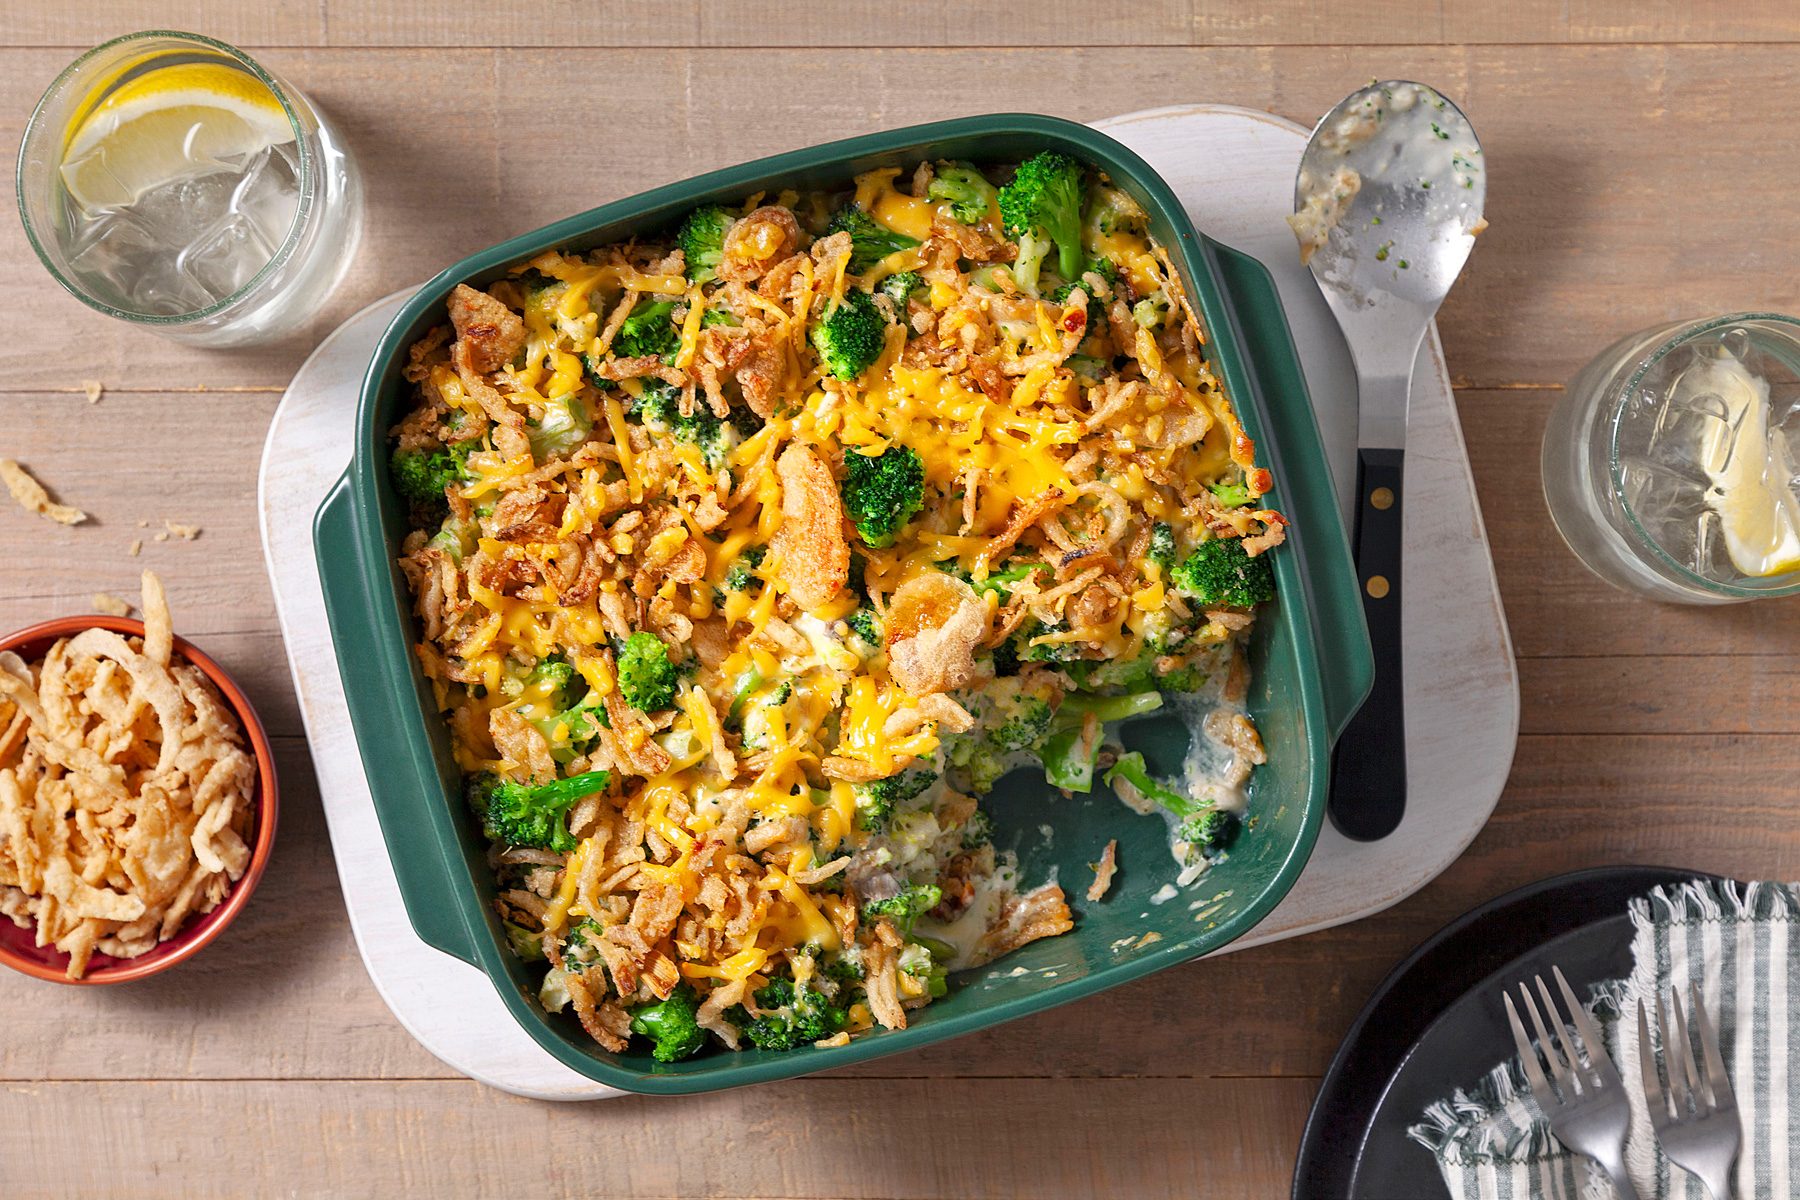 Cheesy Cheddar Broccoli Casserole in a Green Dish Next to a Serving Spoon on a Table